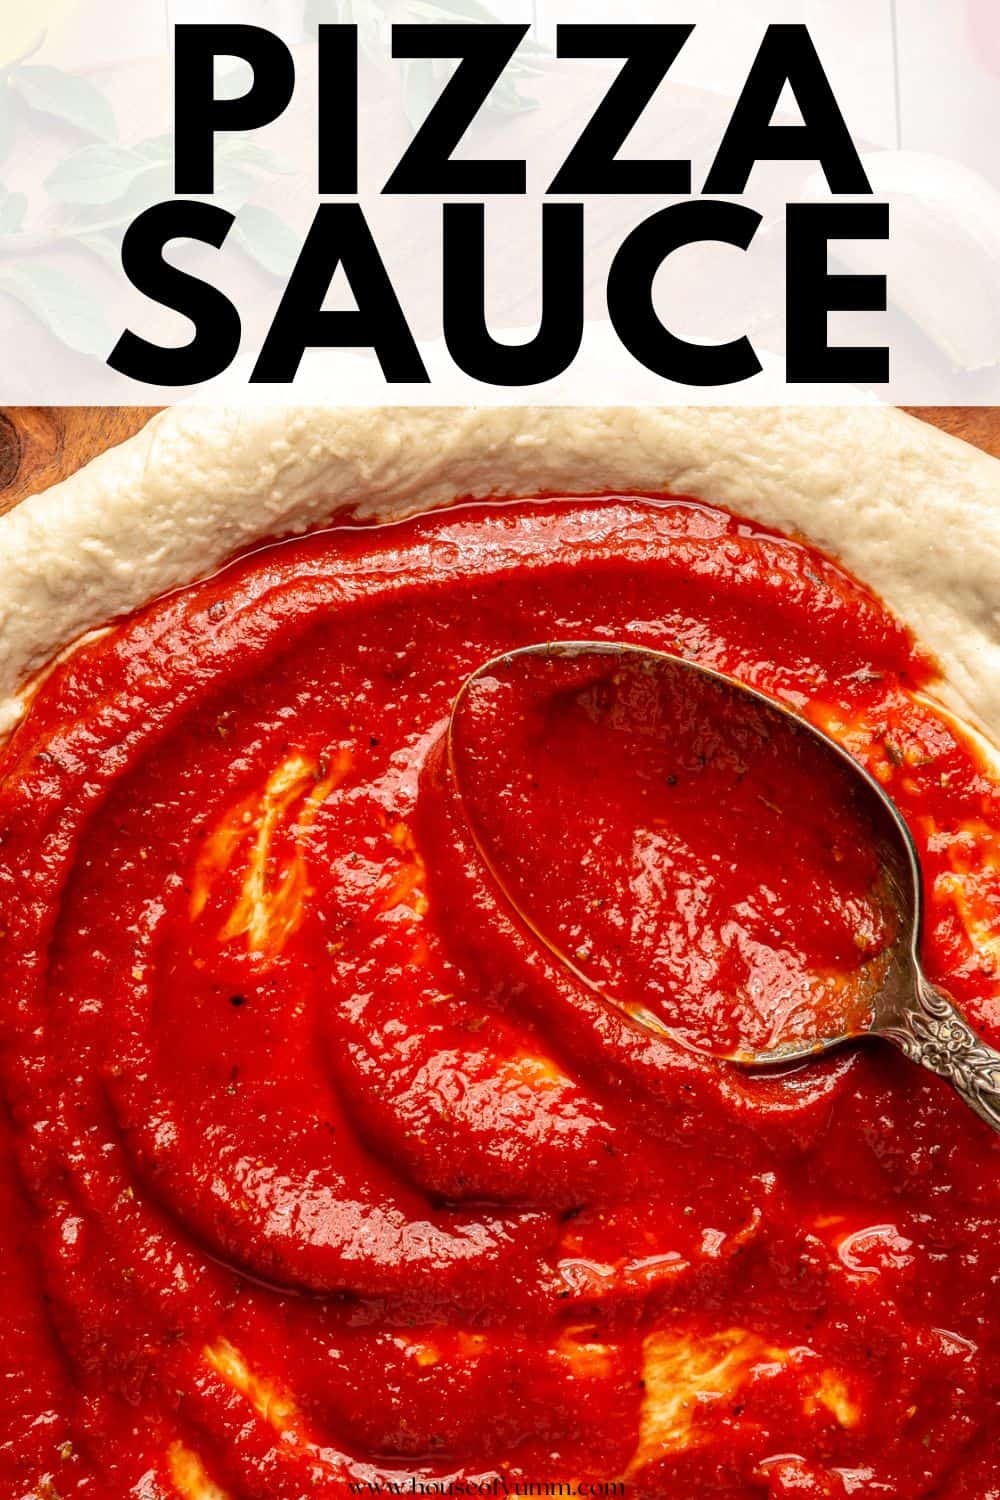 Pizza sauce with text.